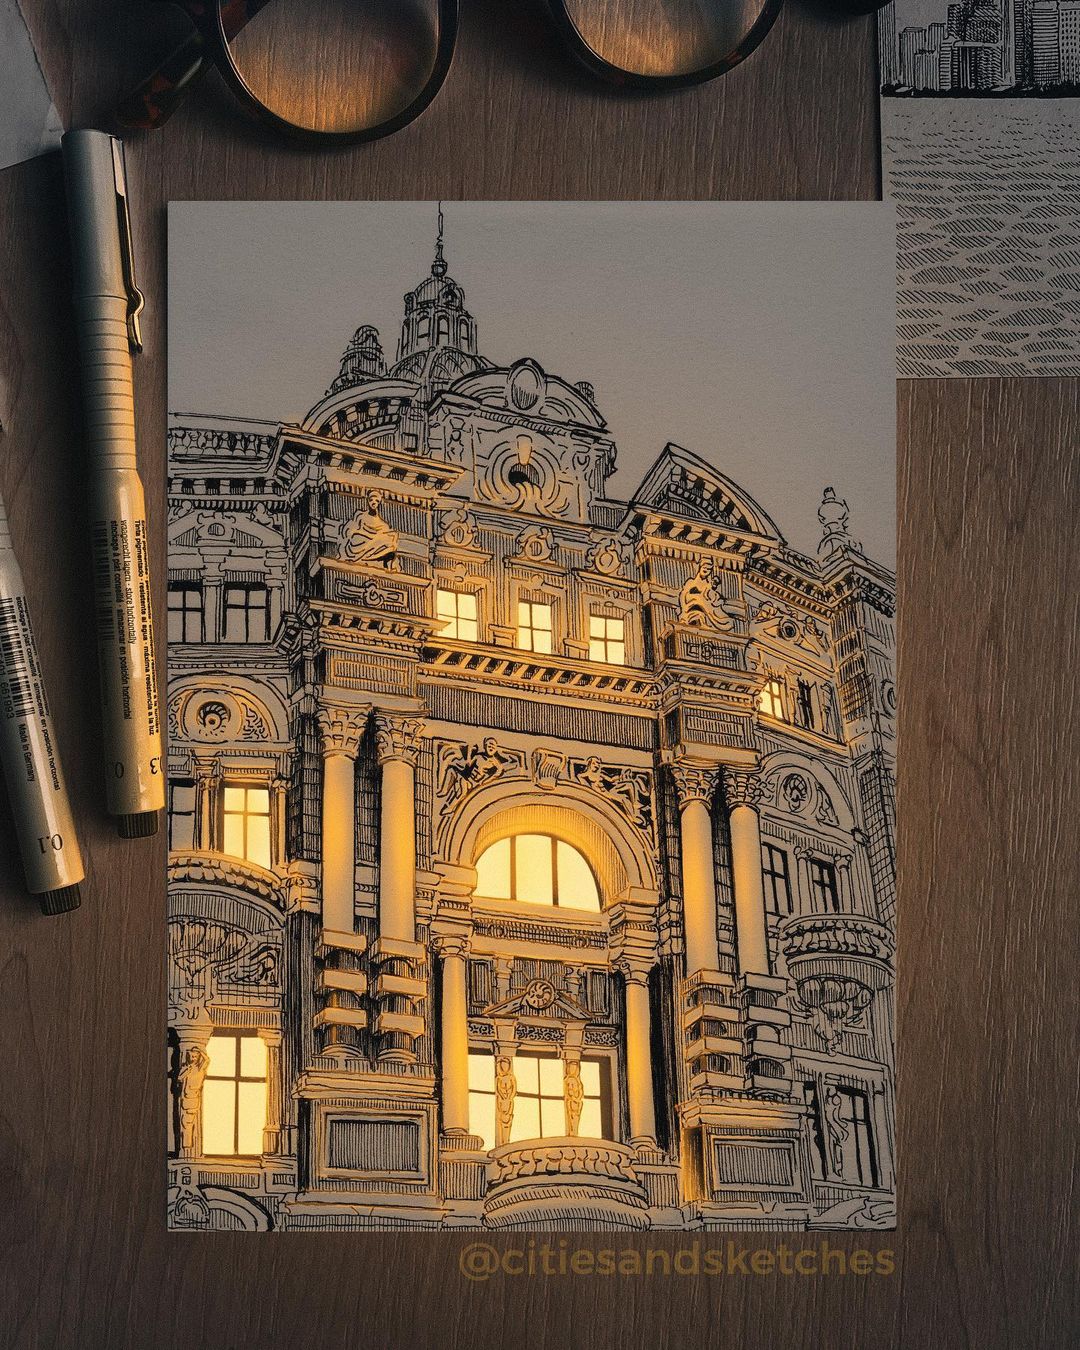 Glowing Archisketch Gorgeously Illuminated Architectural Sketches By Nikita Busyak (1)